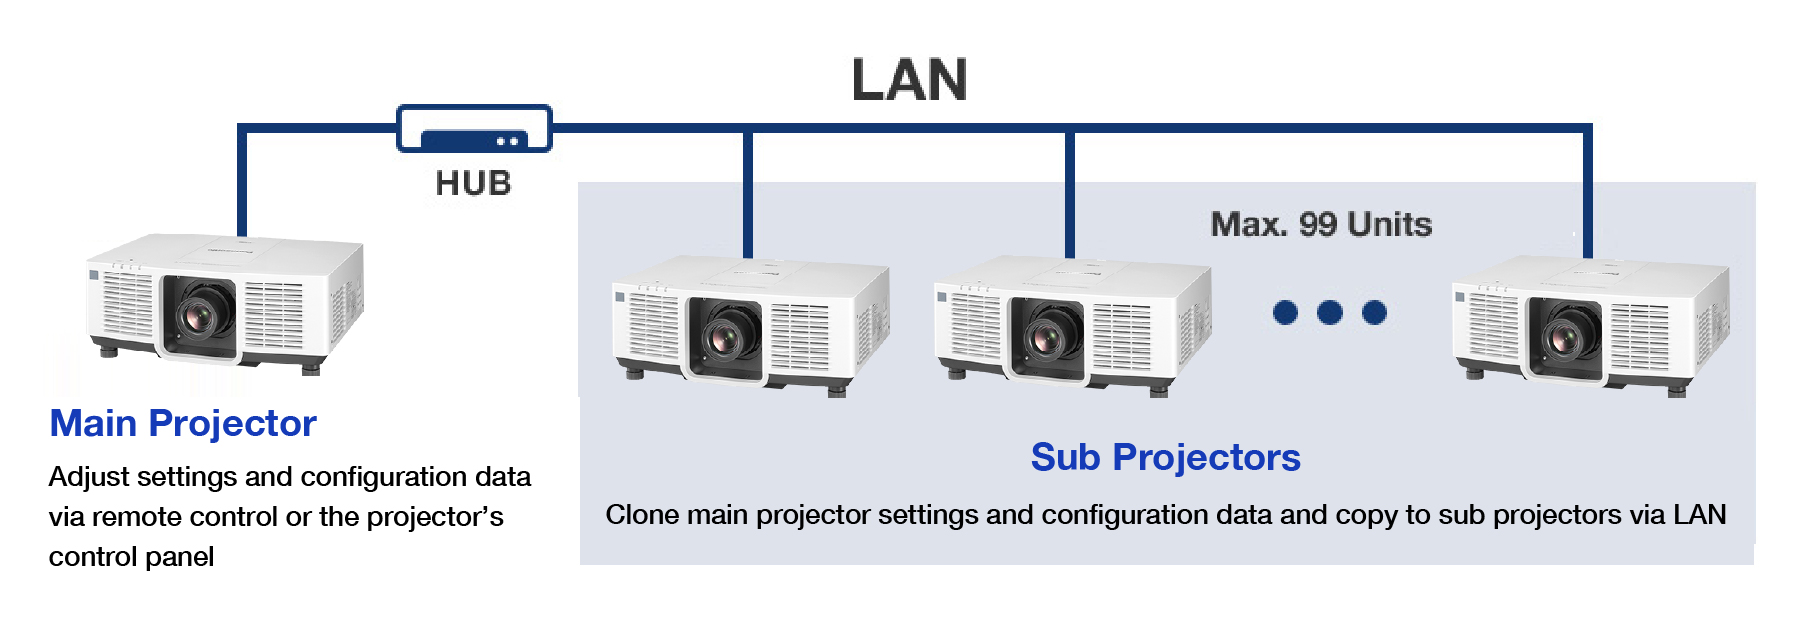 Data cloning to other projectors